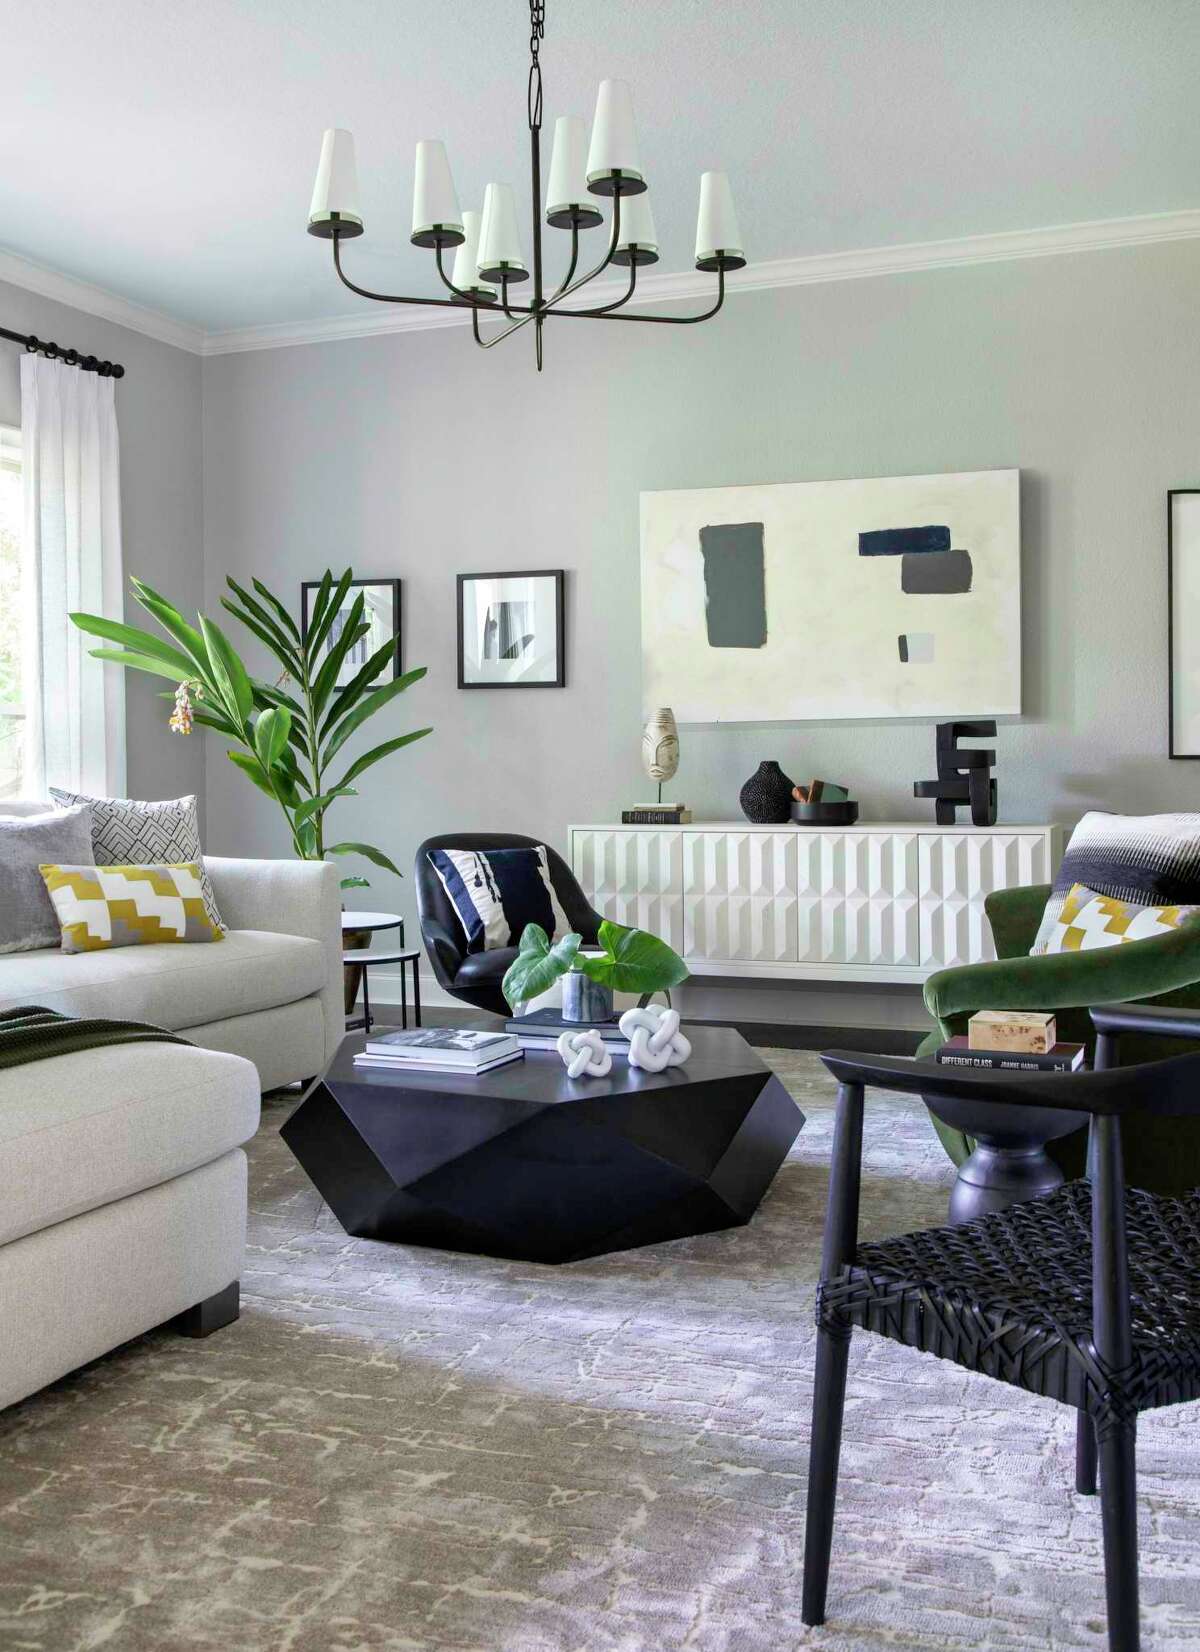 Gerald Johnson Jr.'s Dickinson home was reinvented with "Parisian modern" inspiration. His interior designer, Jacob Medina of Medina Designs, painted most of the interiors Sherwin-Williams Repose Gray and used a mix of neutrals with pops of color, like the green sofa in the living room.